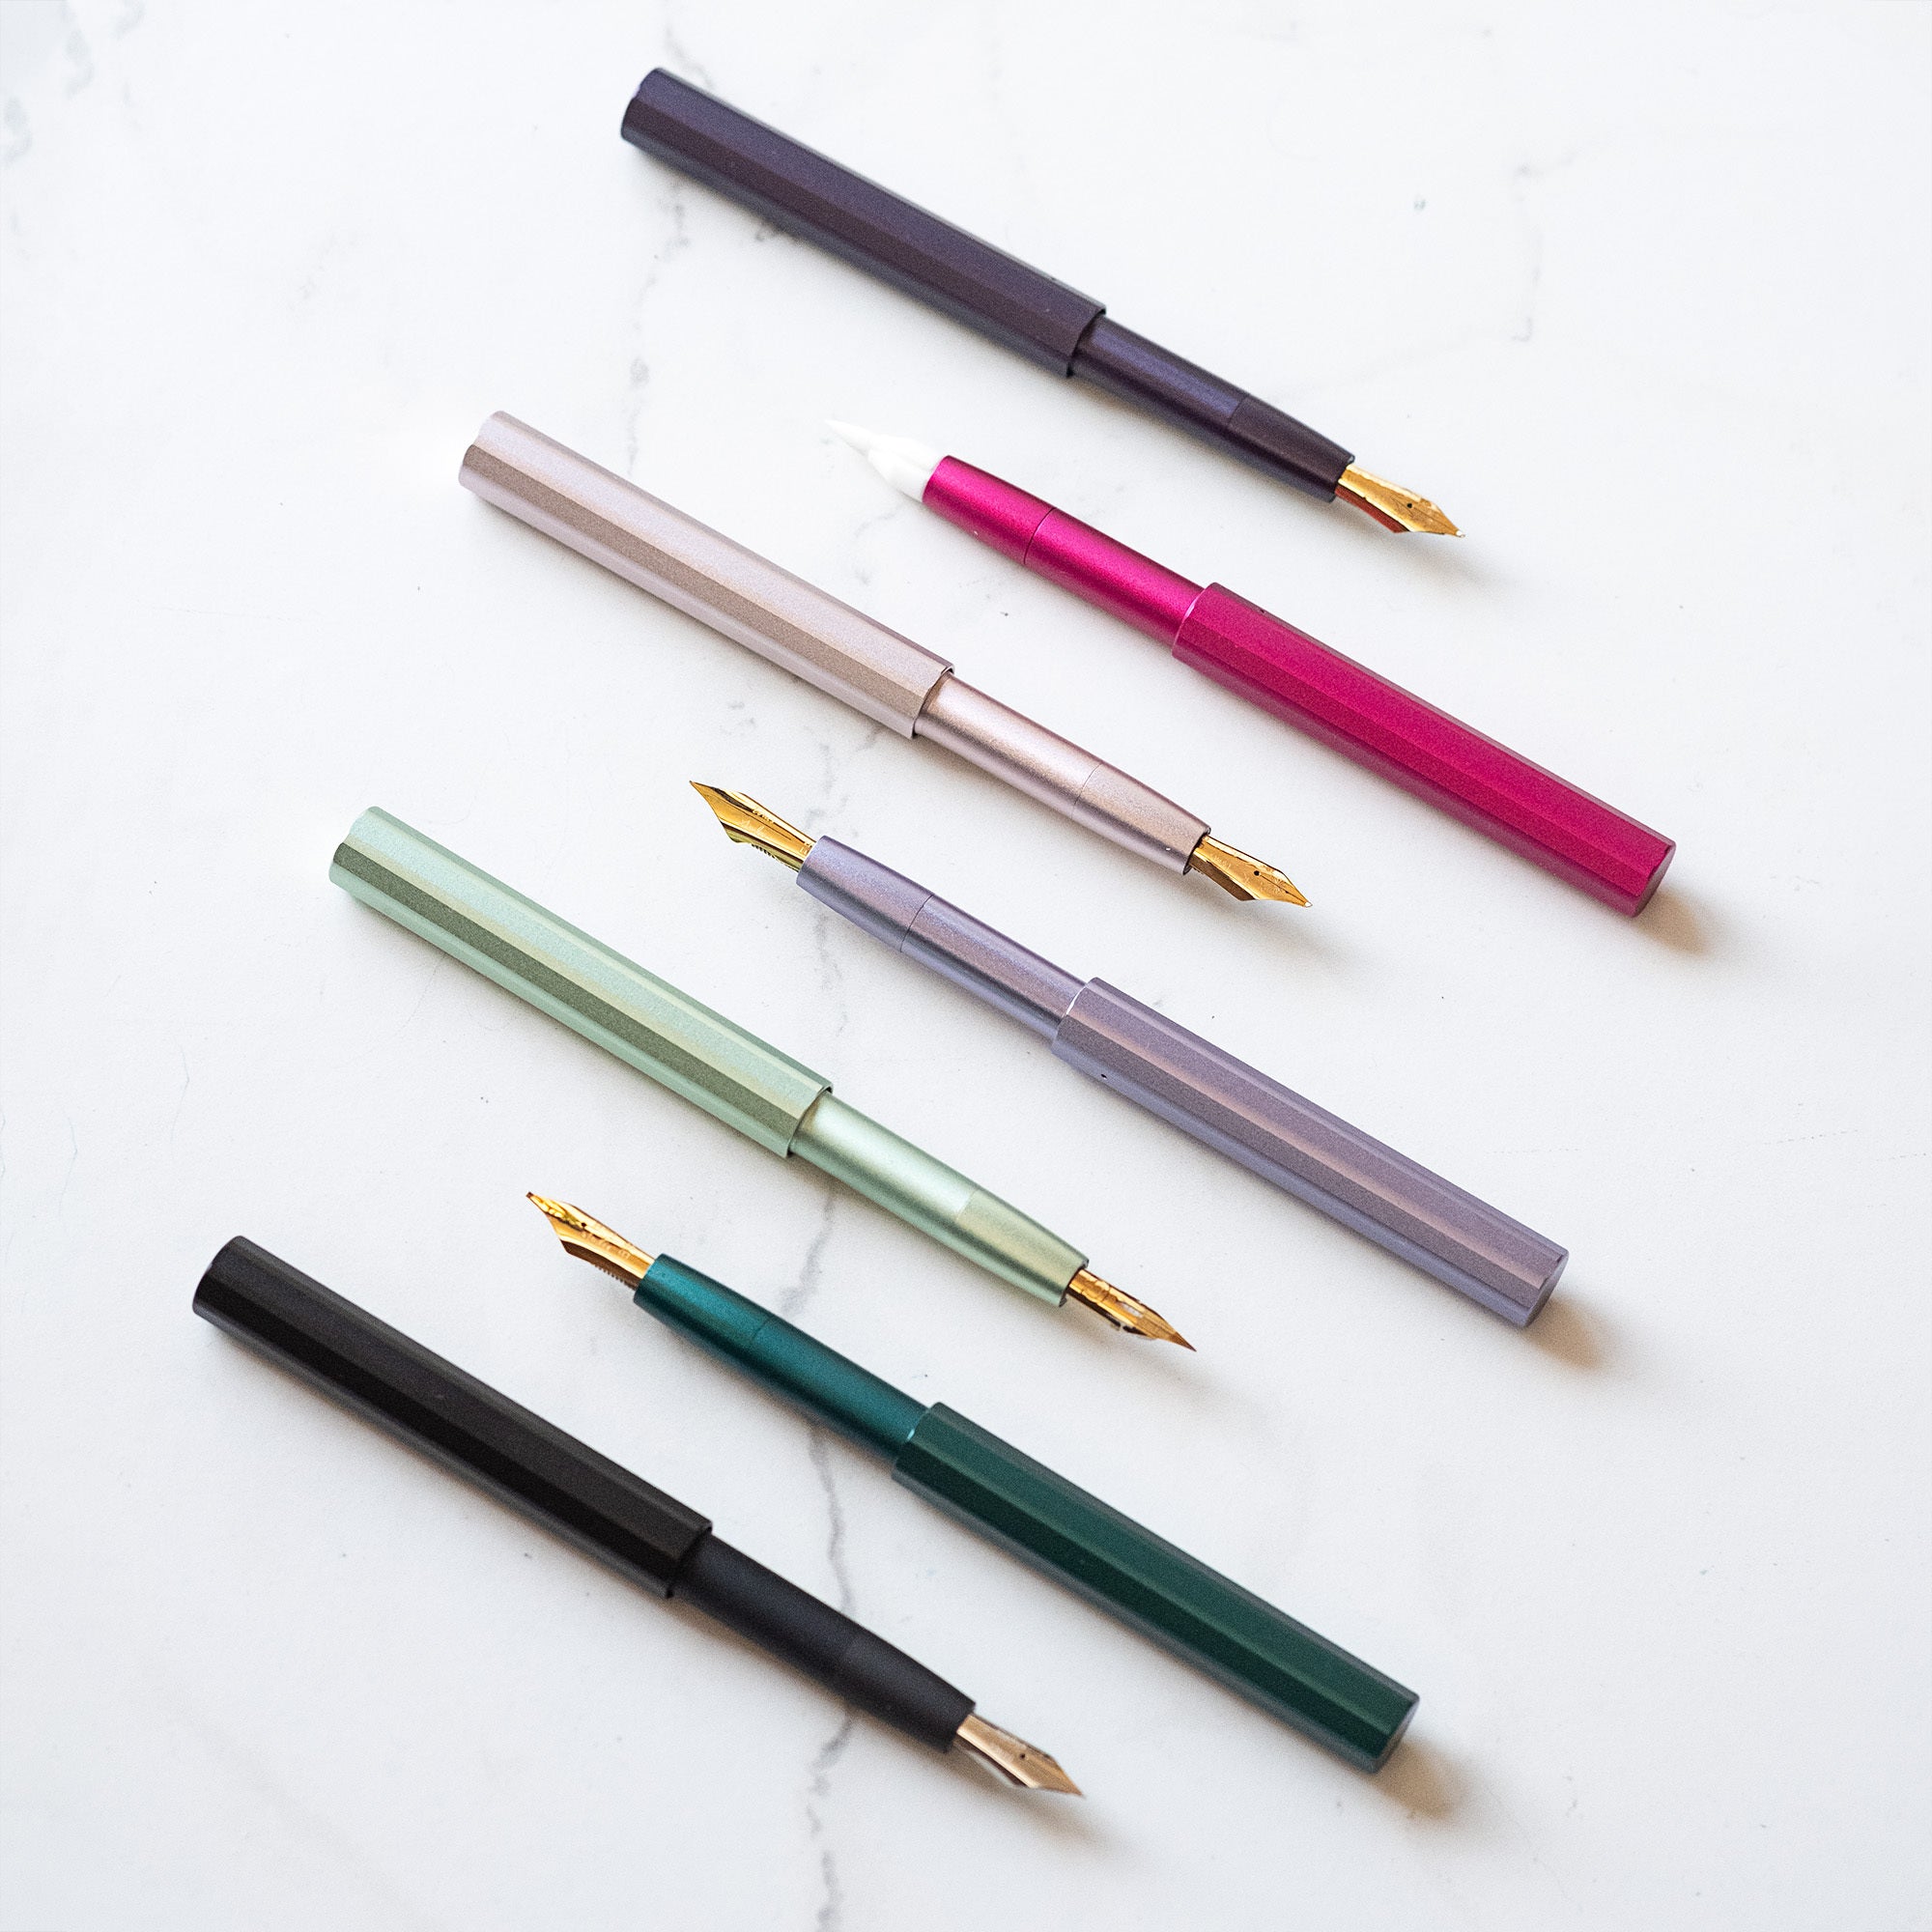 The Pocket fountain pen showing various colours and nibs